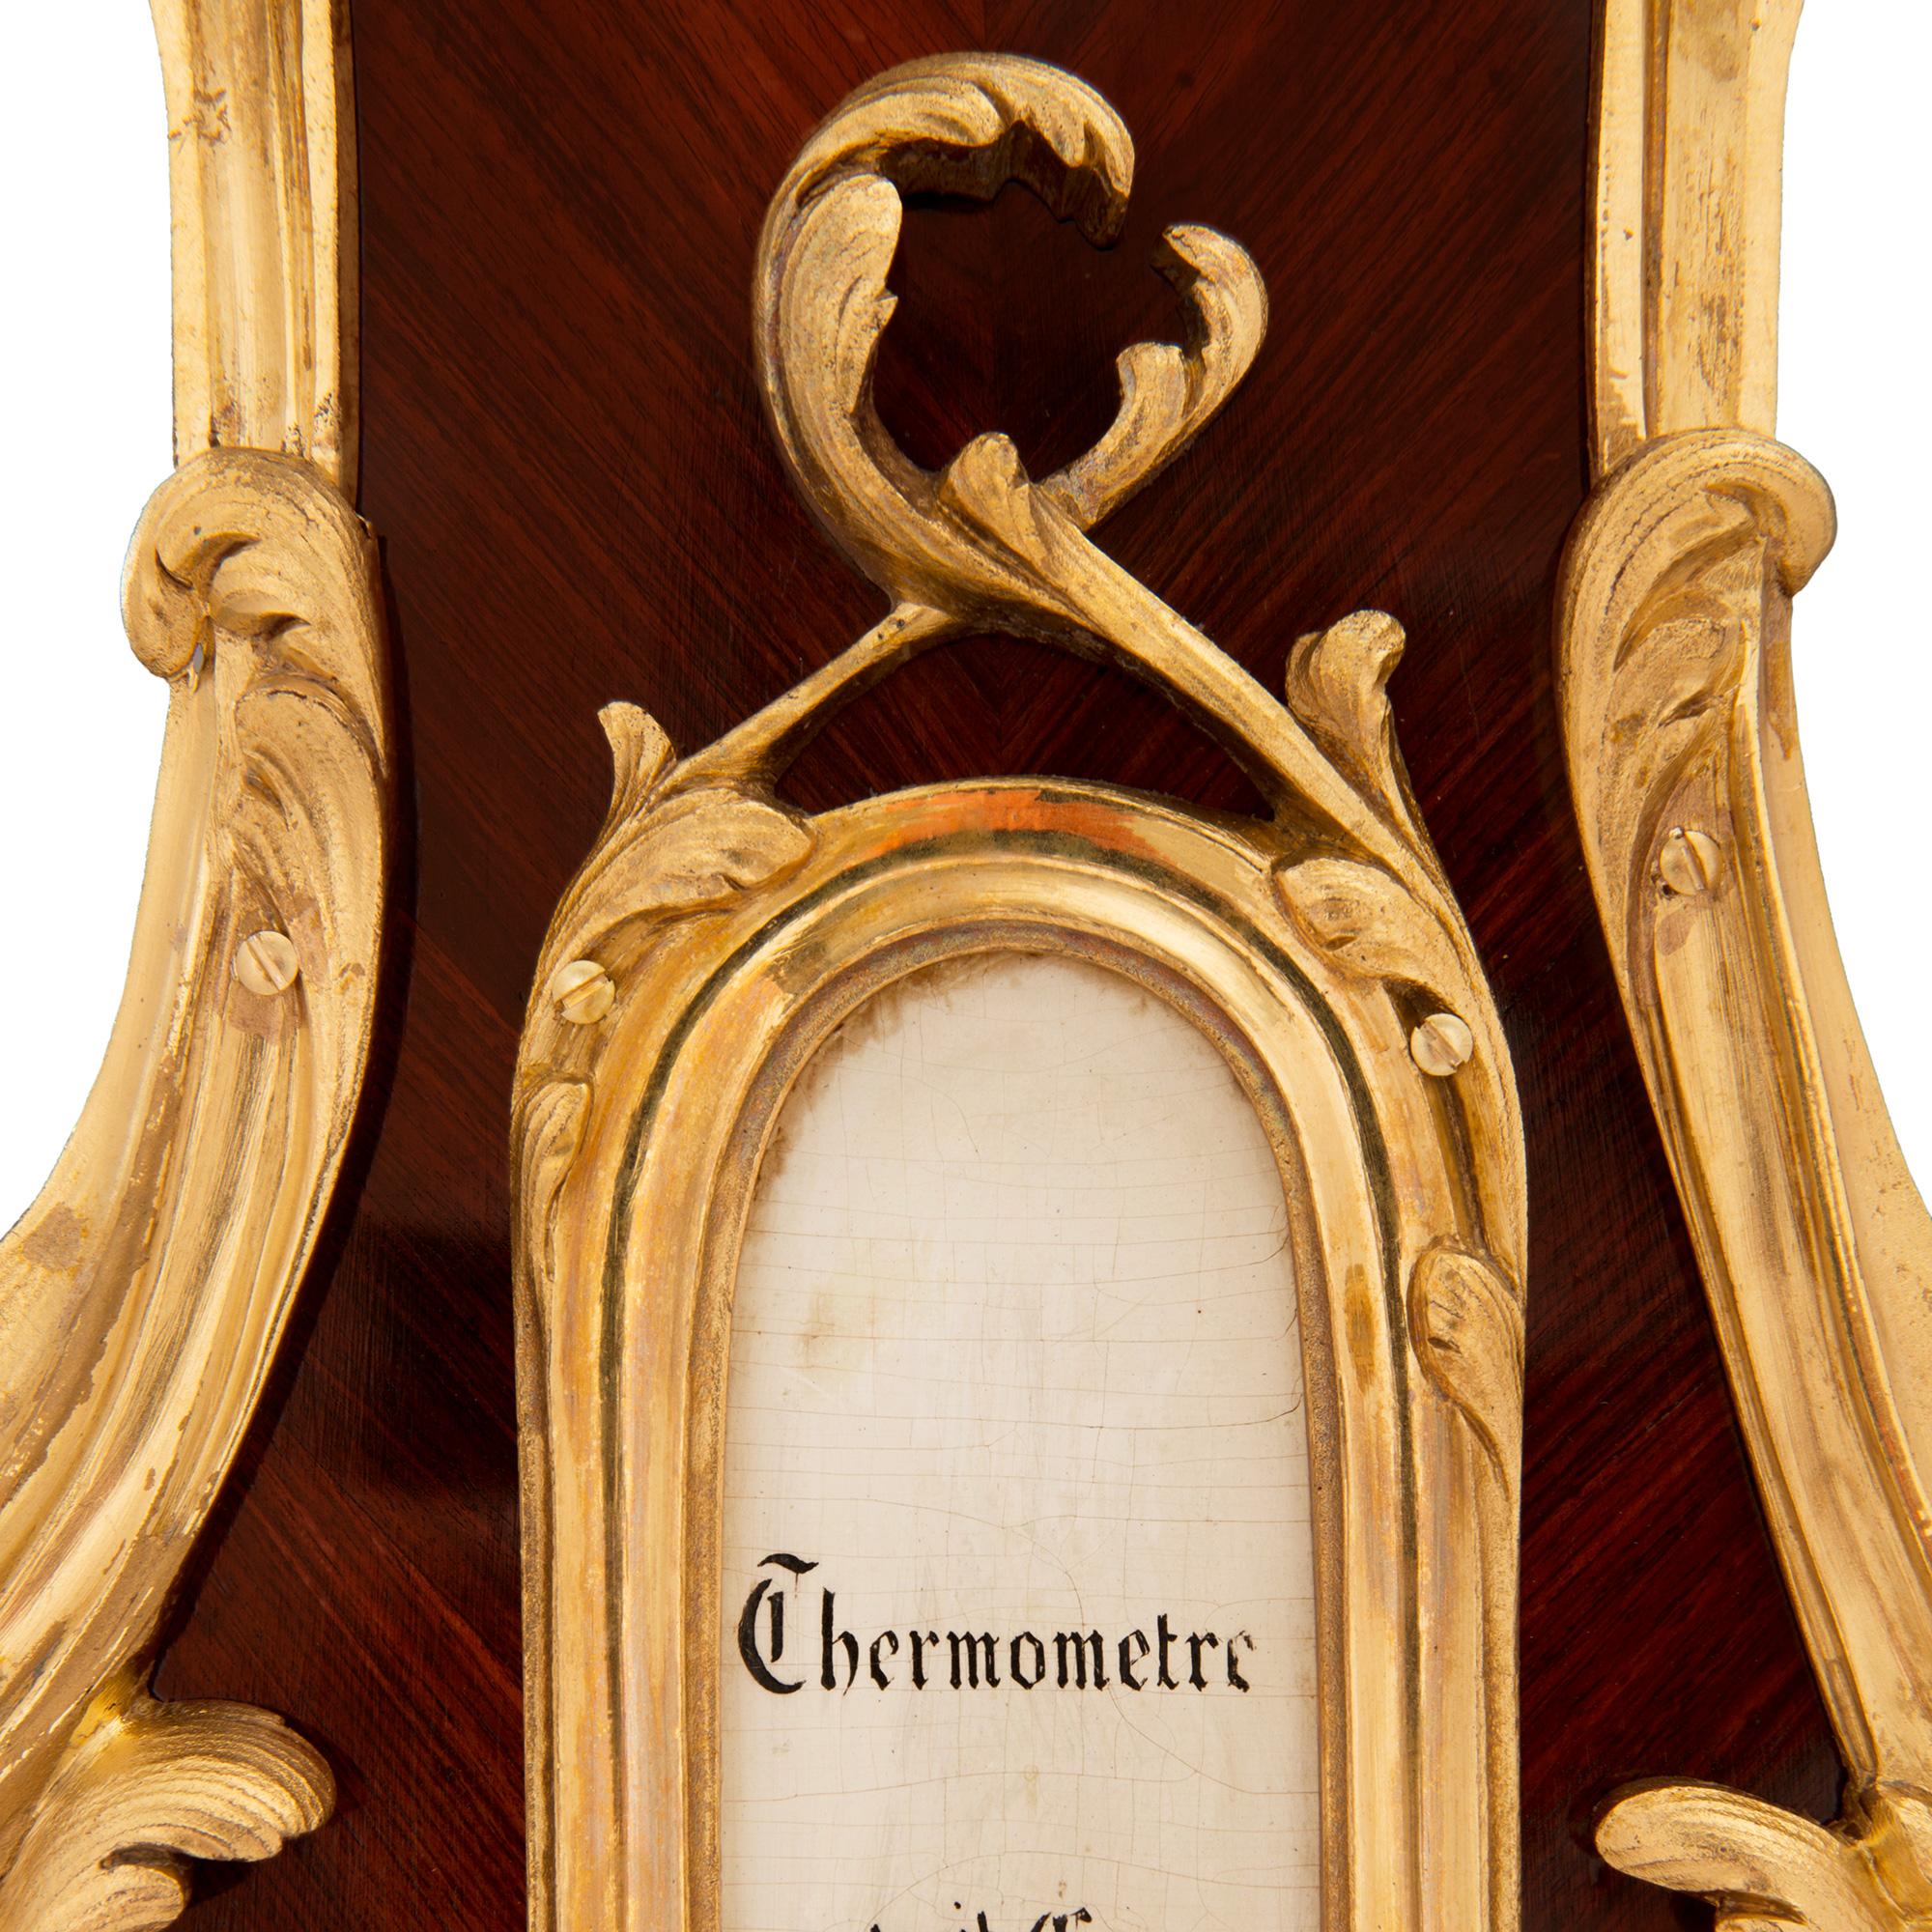 French 19th Century Louis XV Style Kingwood and Ormolu Barometer/Thermometer In Good Condition For Sale In West Palm Beach, FL